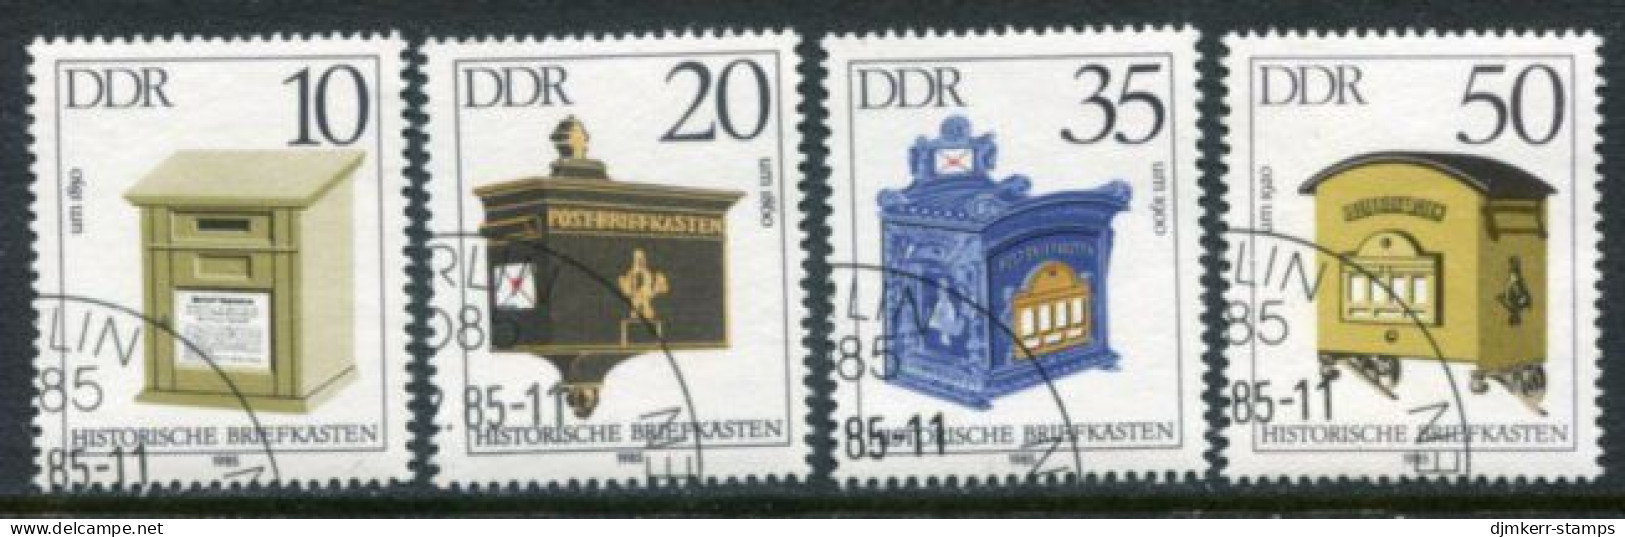 DDR 1985 Histpric Letterboxes Singles Used .  Michel 2924-27 - Used Stamps